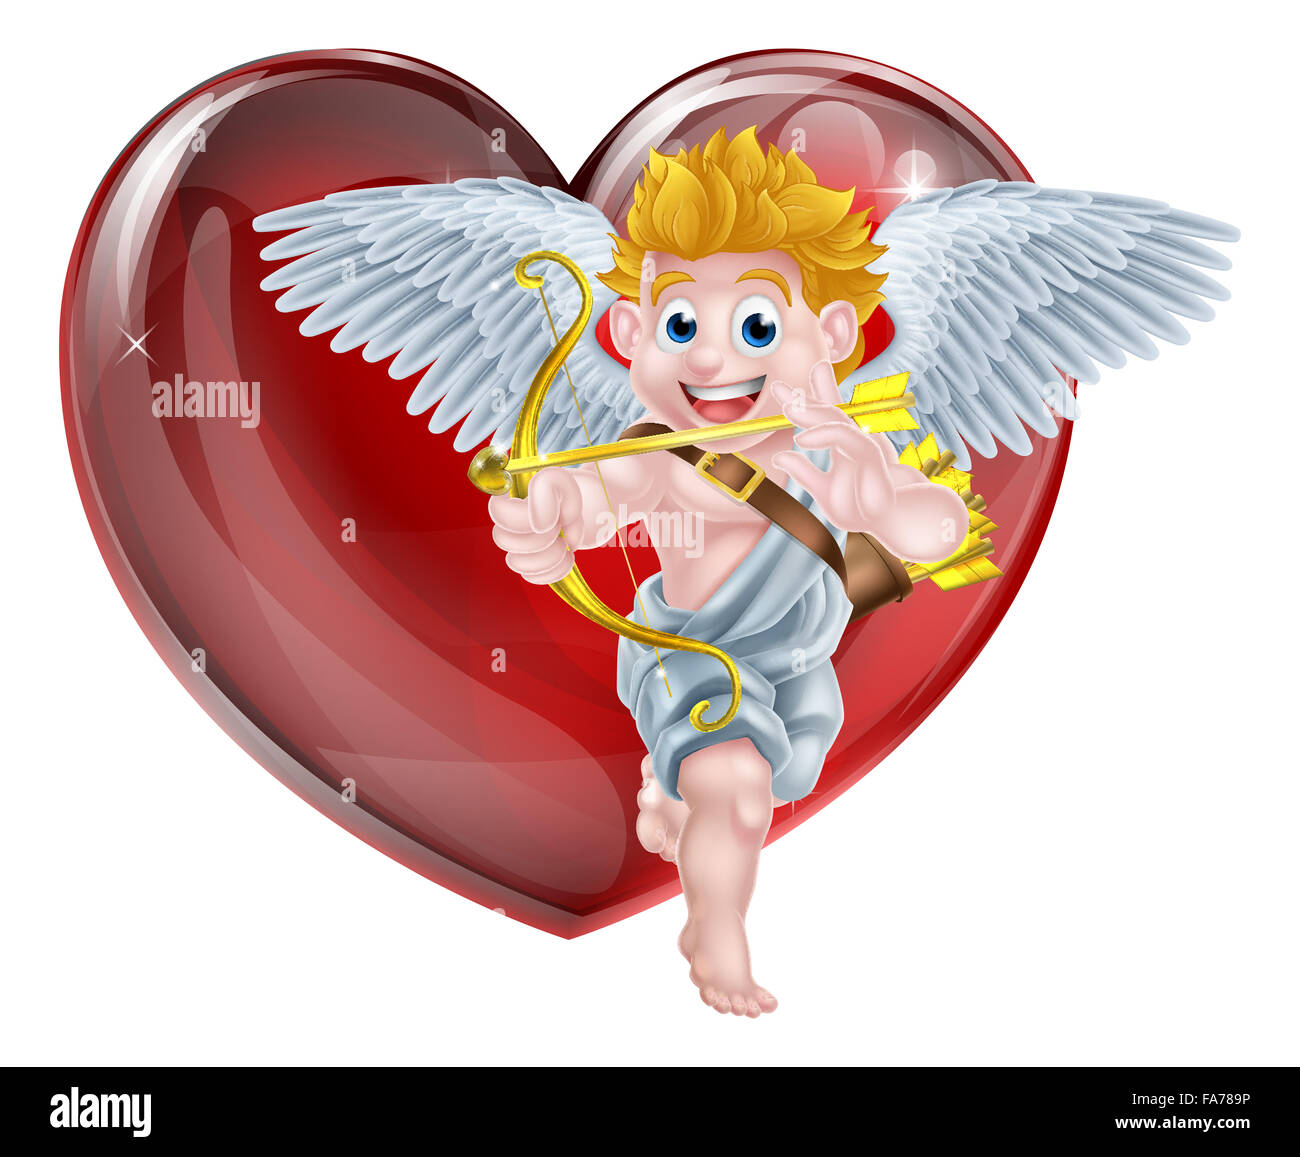 Cartoon valentines day cupid winged angel character shooting his gold bow and heart arrow in front of a big red valentines heart Stock Photo